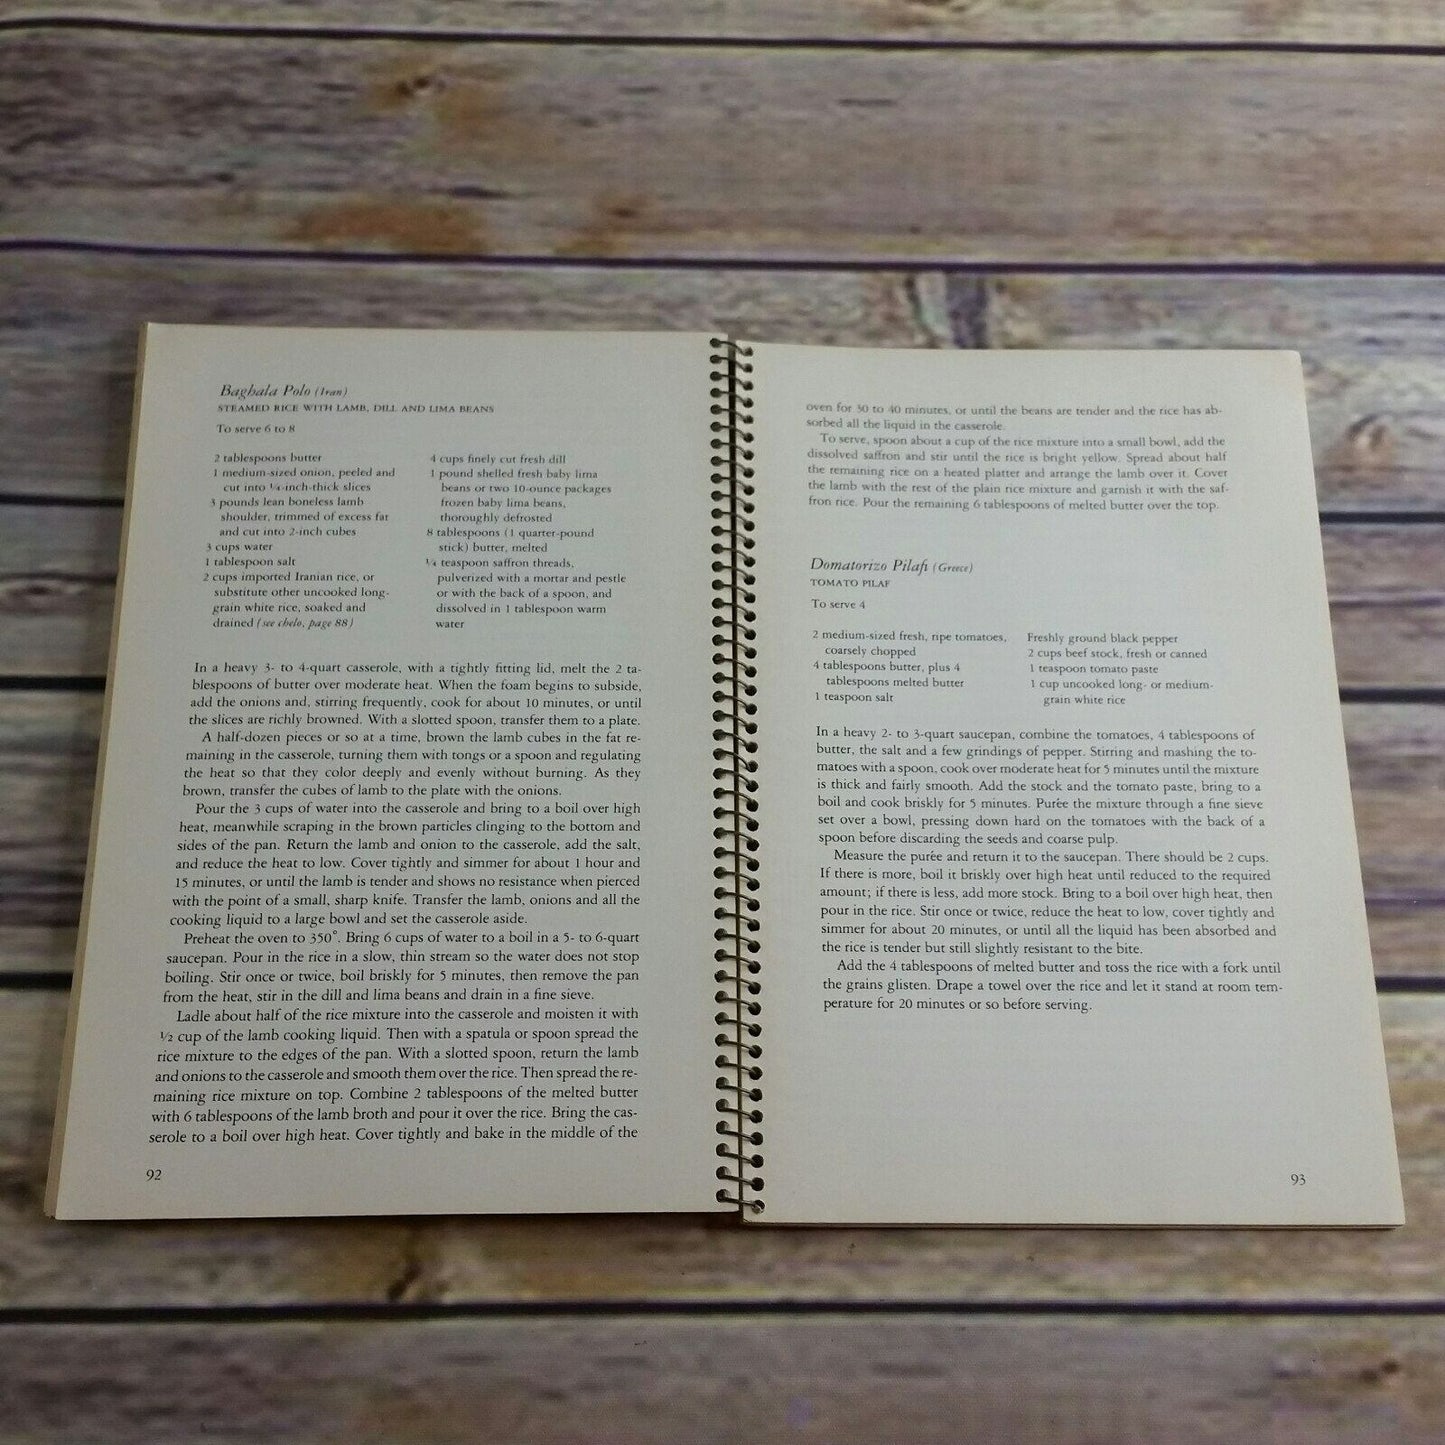 Vtg Middle Eastern Cookbook Middle Eastern Recipes Time Life Books Foods of the World 1969 Spiral Bound